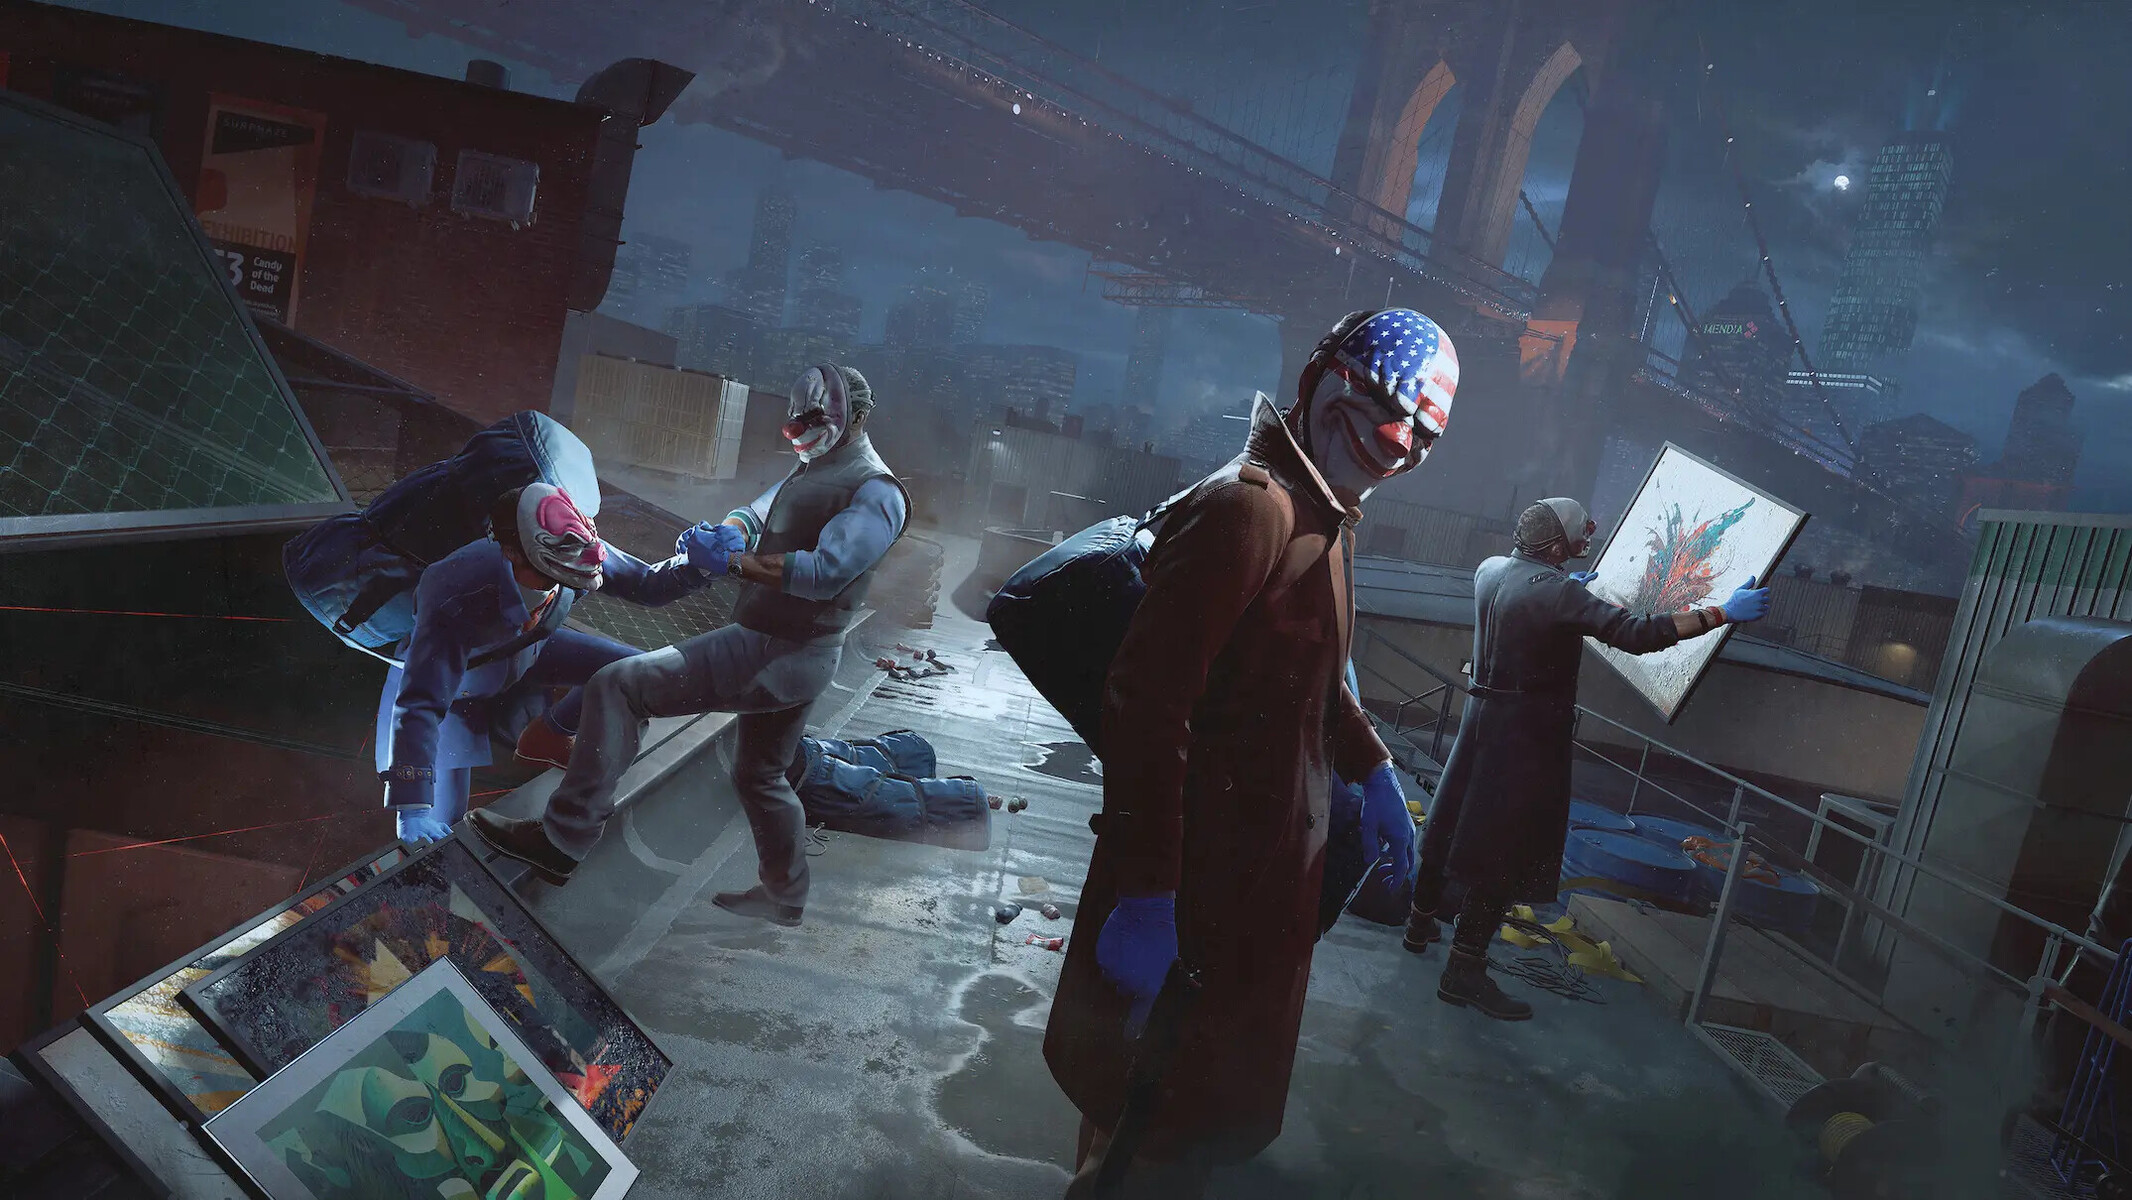 Payday 3 suffered from a very slow launch due to server issues and